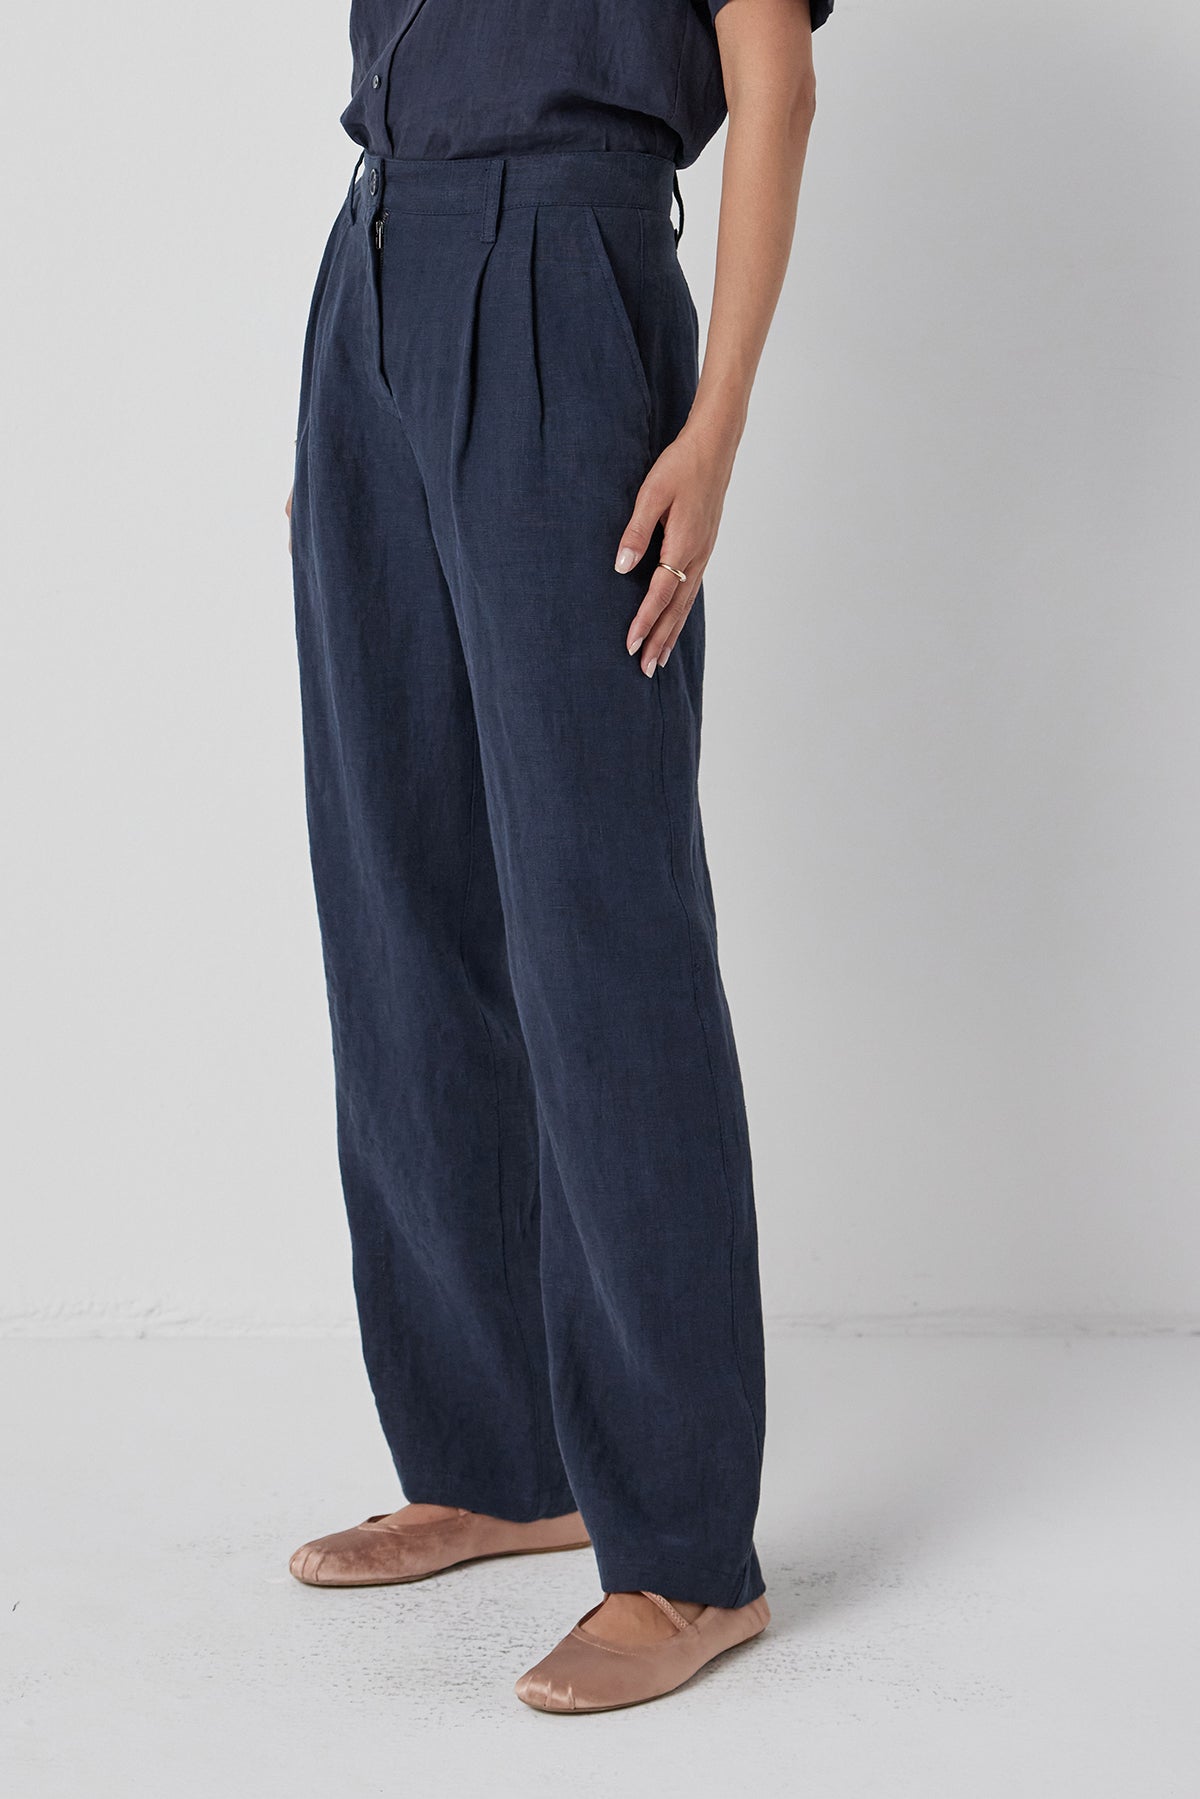   Woman in Velvet by Jenny Graham's POMONA PANT, dark, heavy-weight linen straight-leg pants and tan flats standing against a white background. 